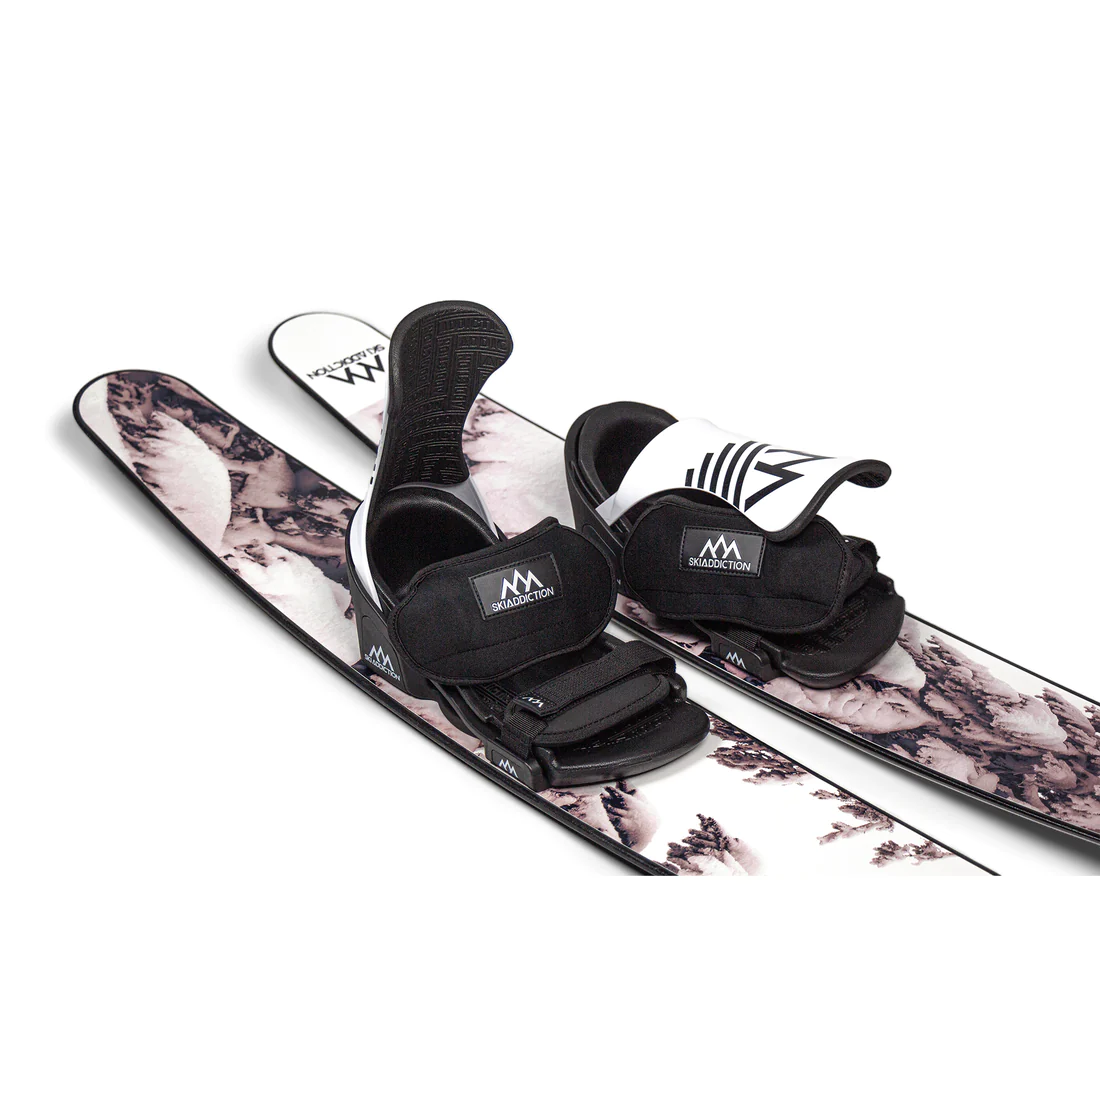 The Ultimate Trampoline Skis and Snowboards - Backyard Dreams